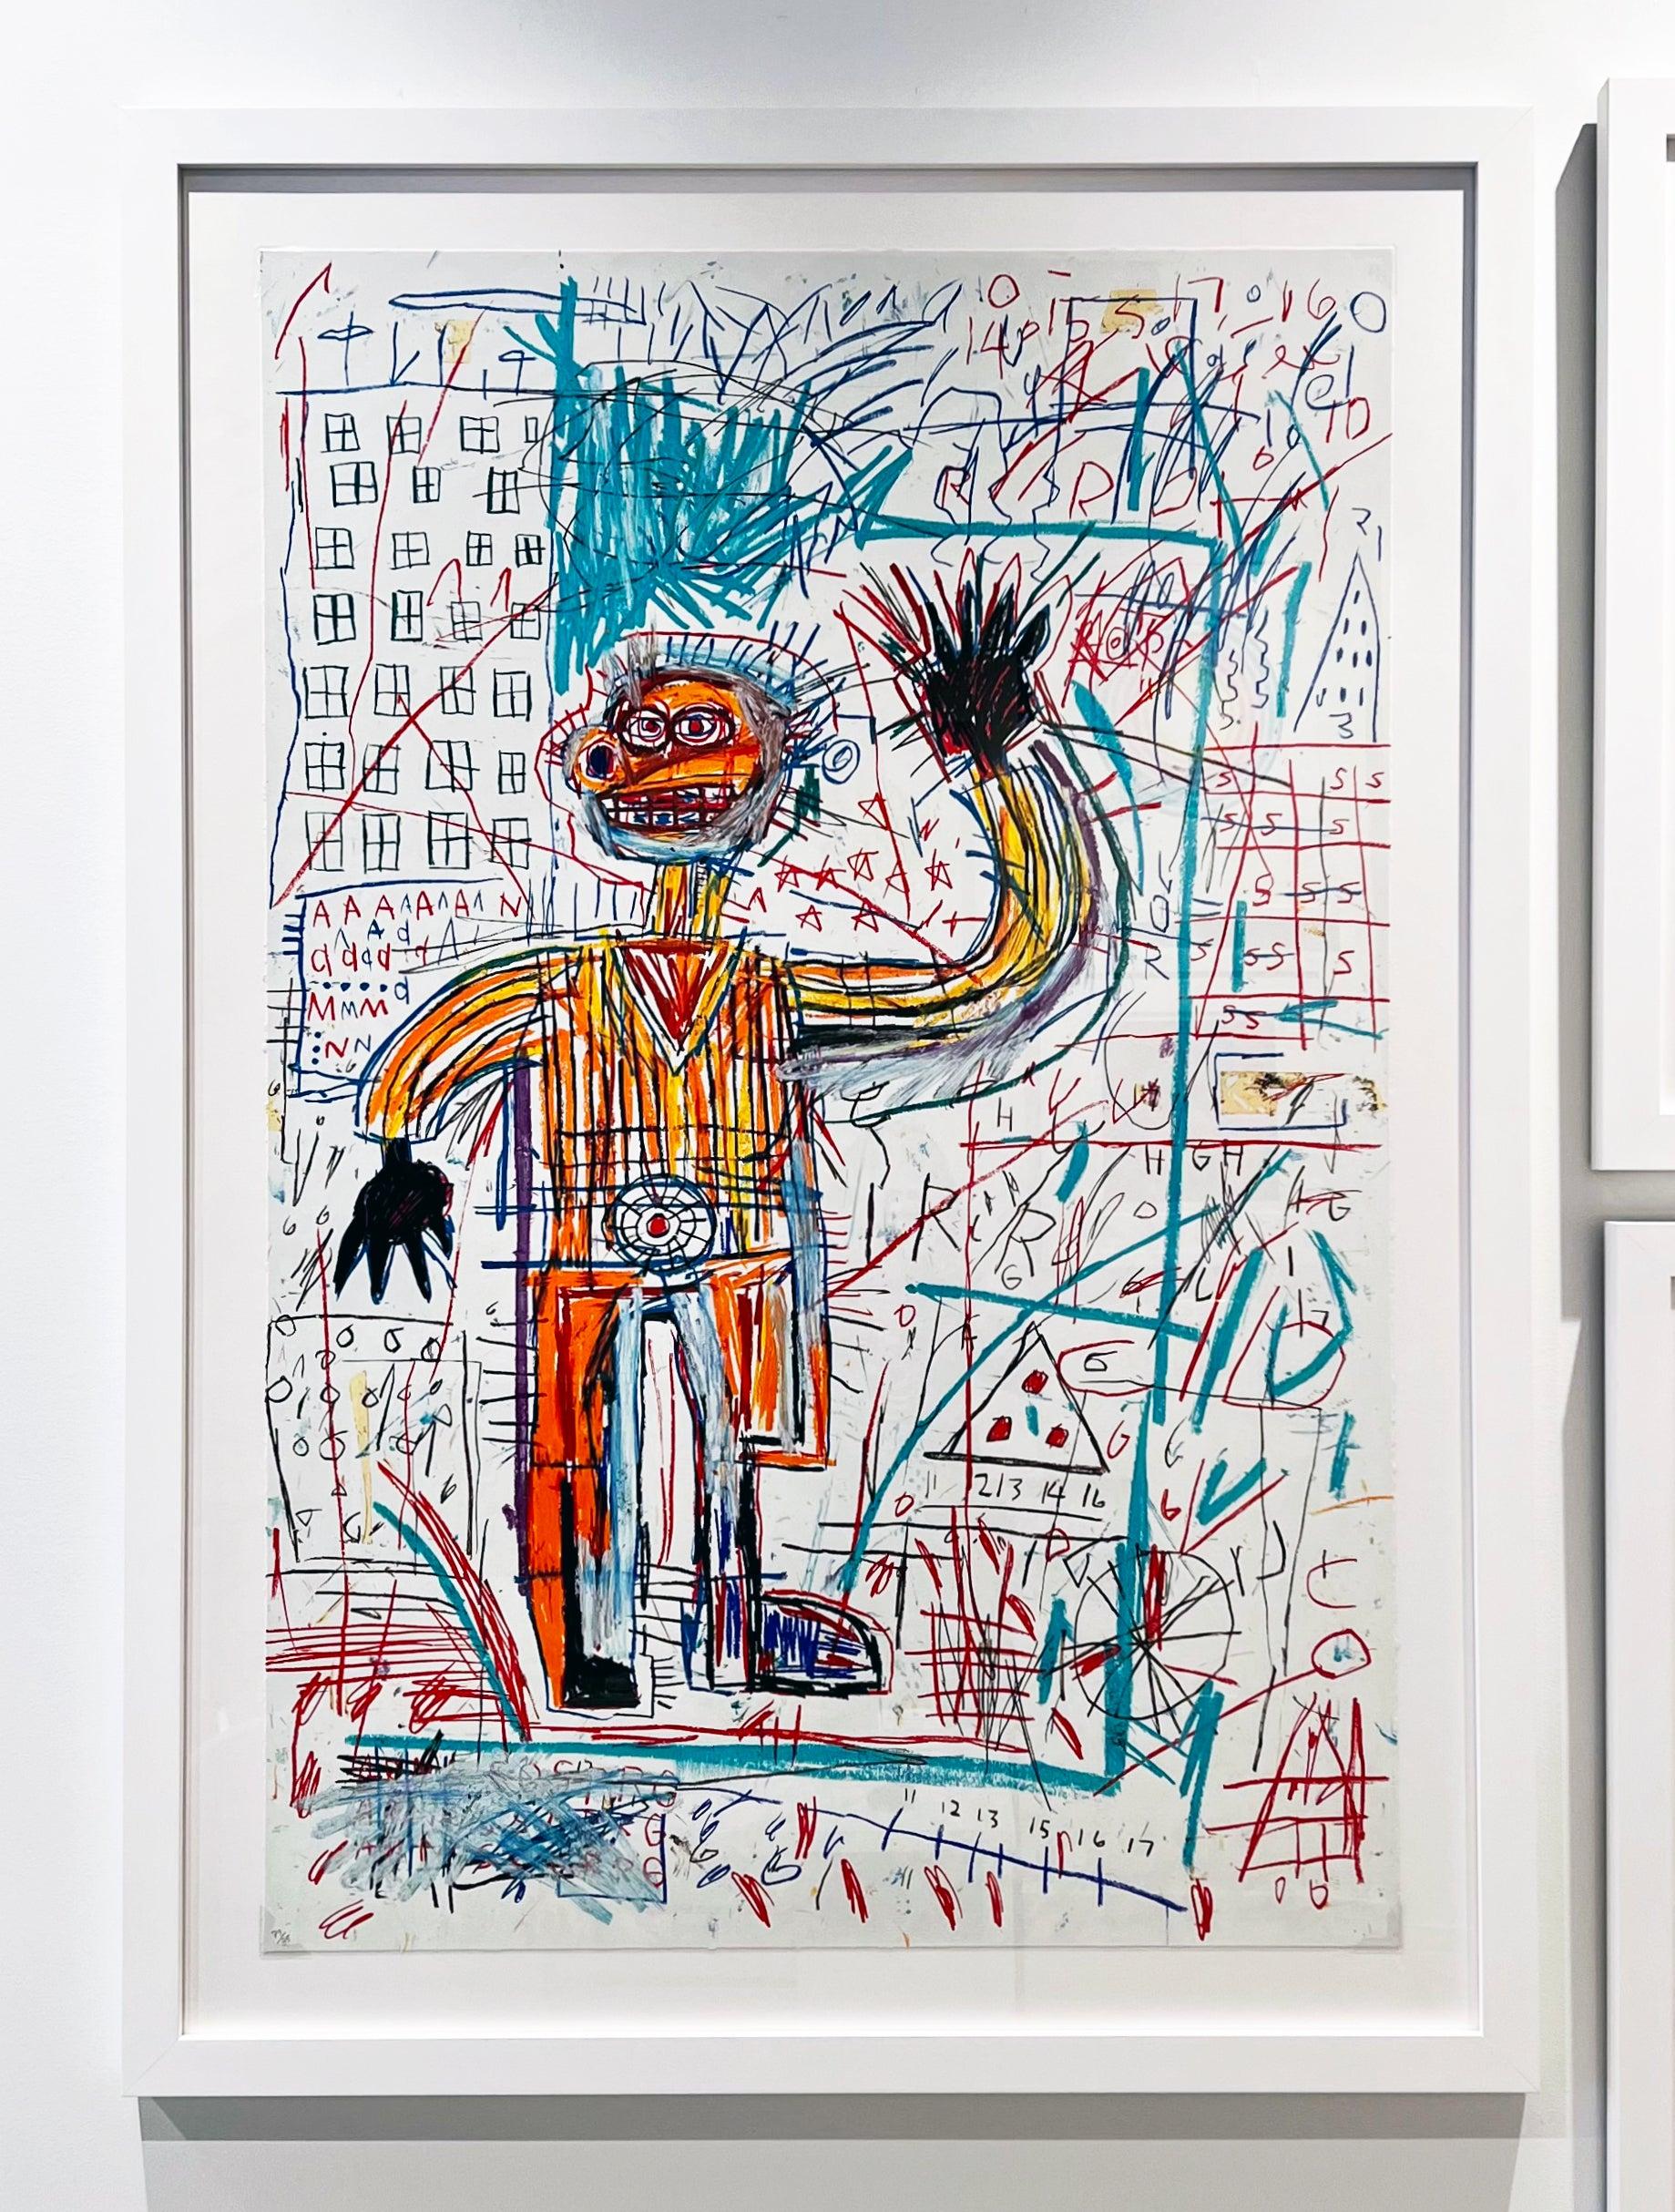 jean michel basquiat most expensive painting